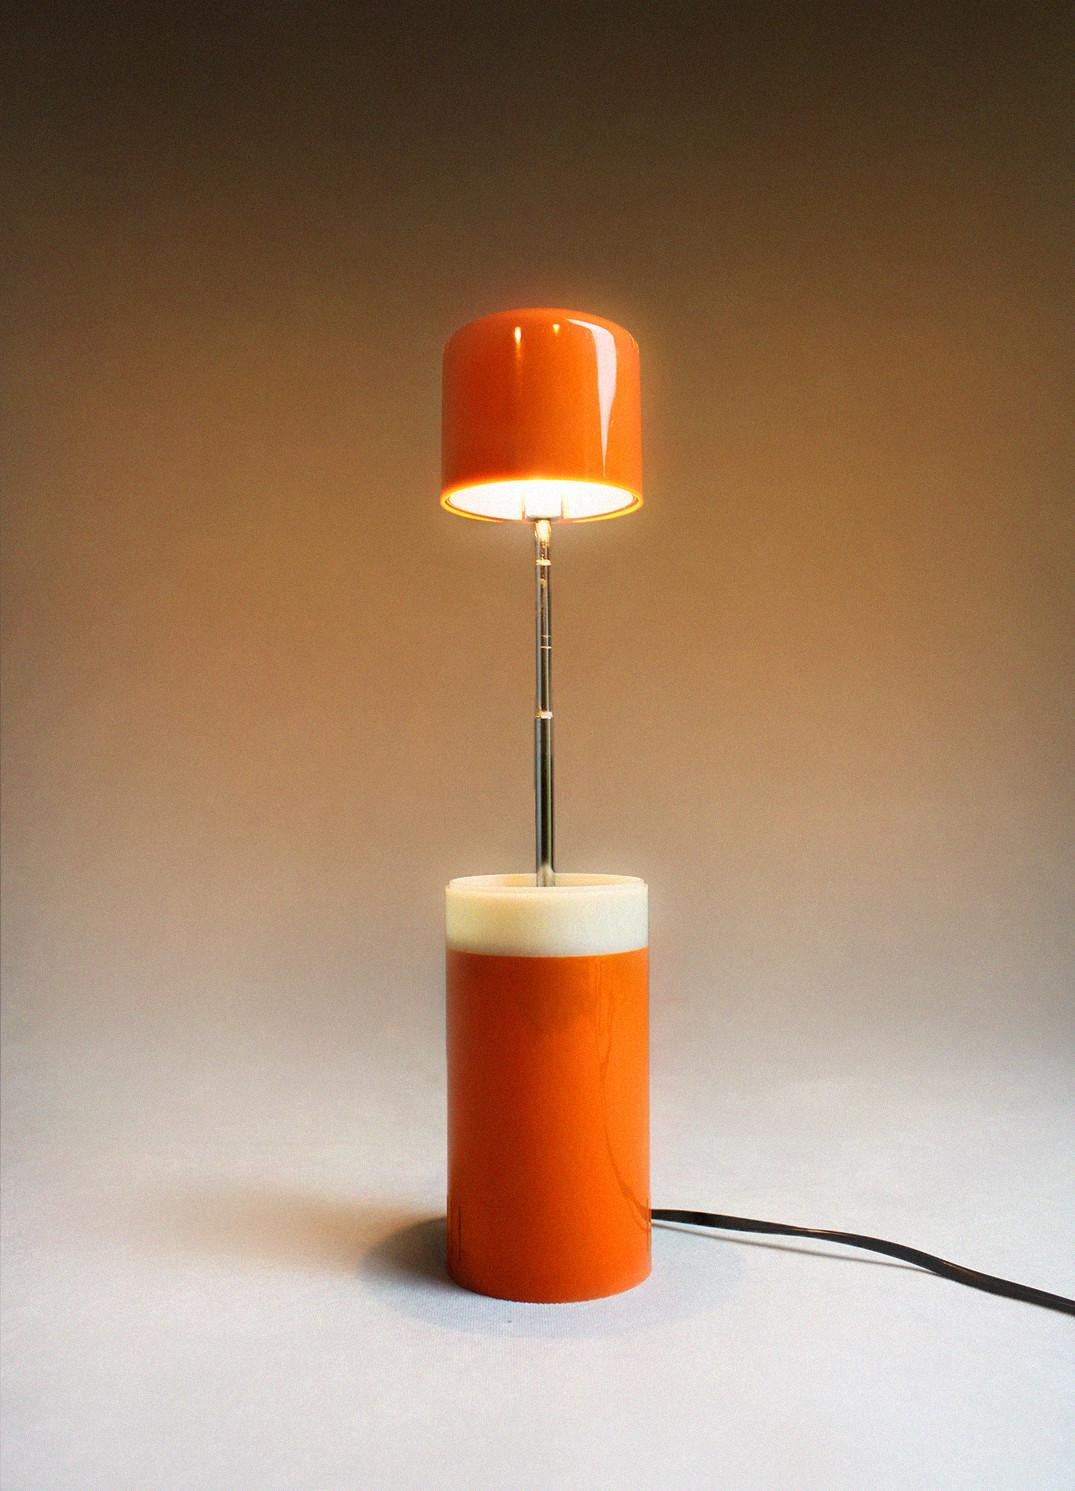 This entertaining extendable desk lamp is an addition to your interior. The orange color paired with the design makes this retro lamp fall within the space age style. The easy system allows you to adjust the desk lamp in terms of light or direction